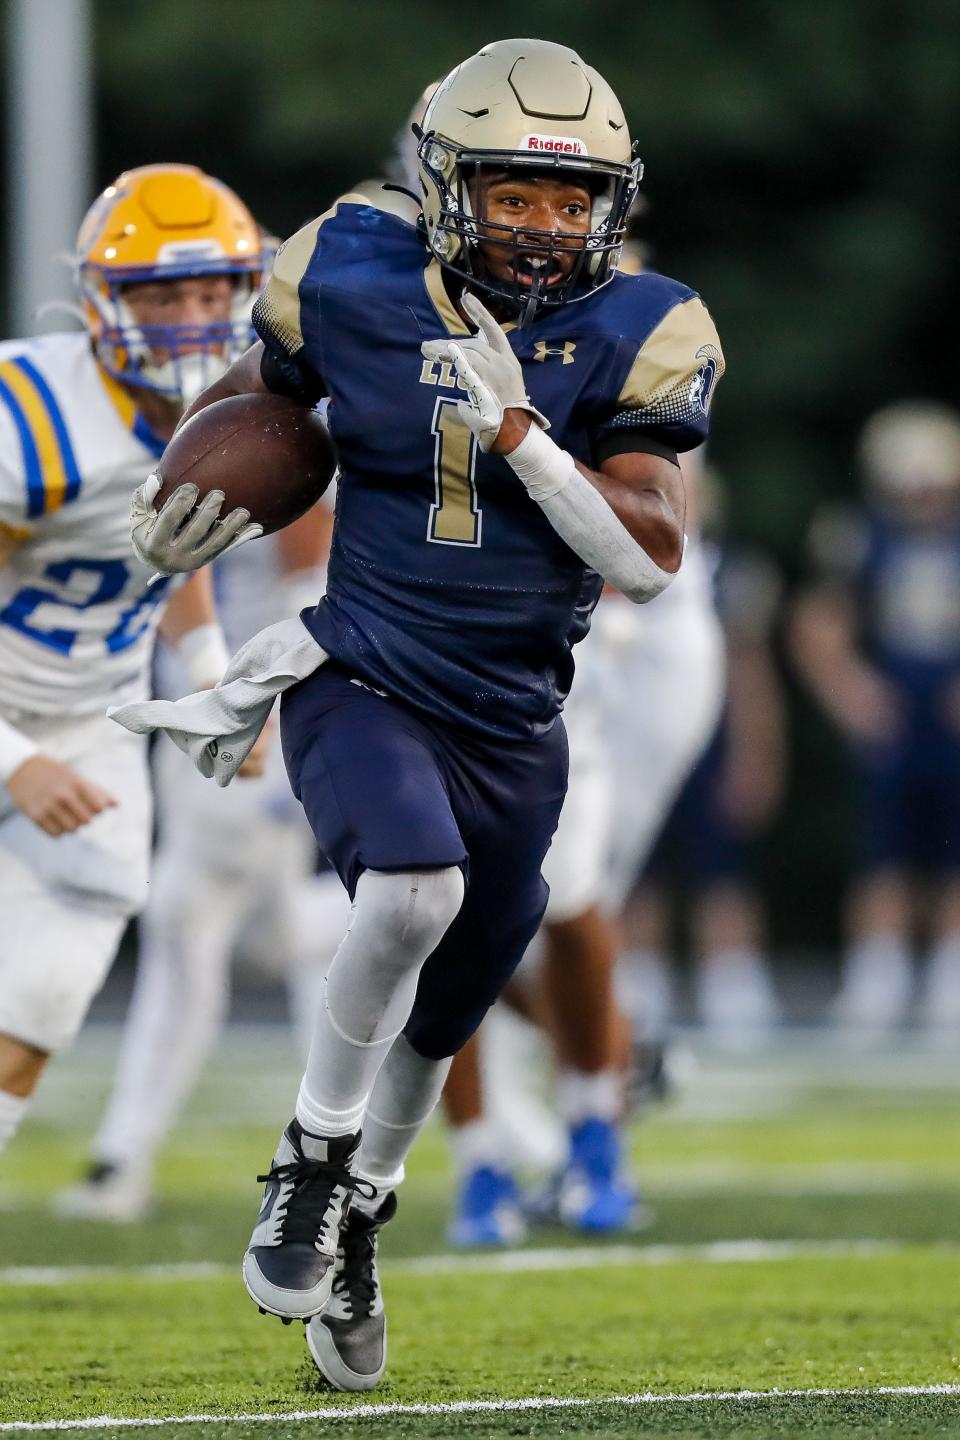 Lloyd Memorial running back Yurii Collins Comer (1) has 660 rush yards and nine touchdowns this season for the Juggernauts, who are ranked fifth in the Kentucky high school football state medial poll.